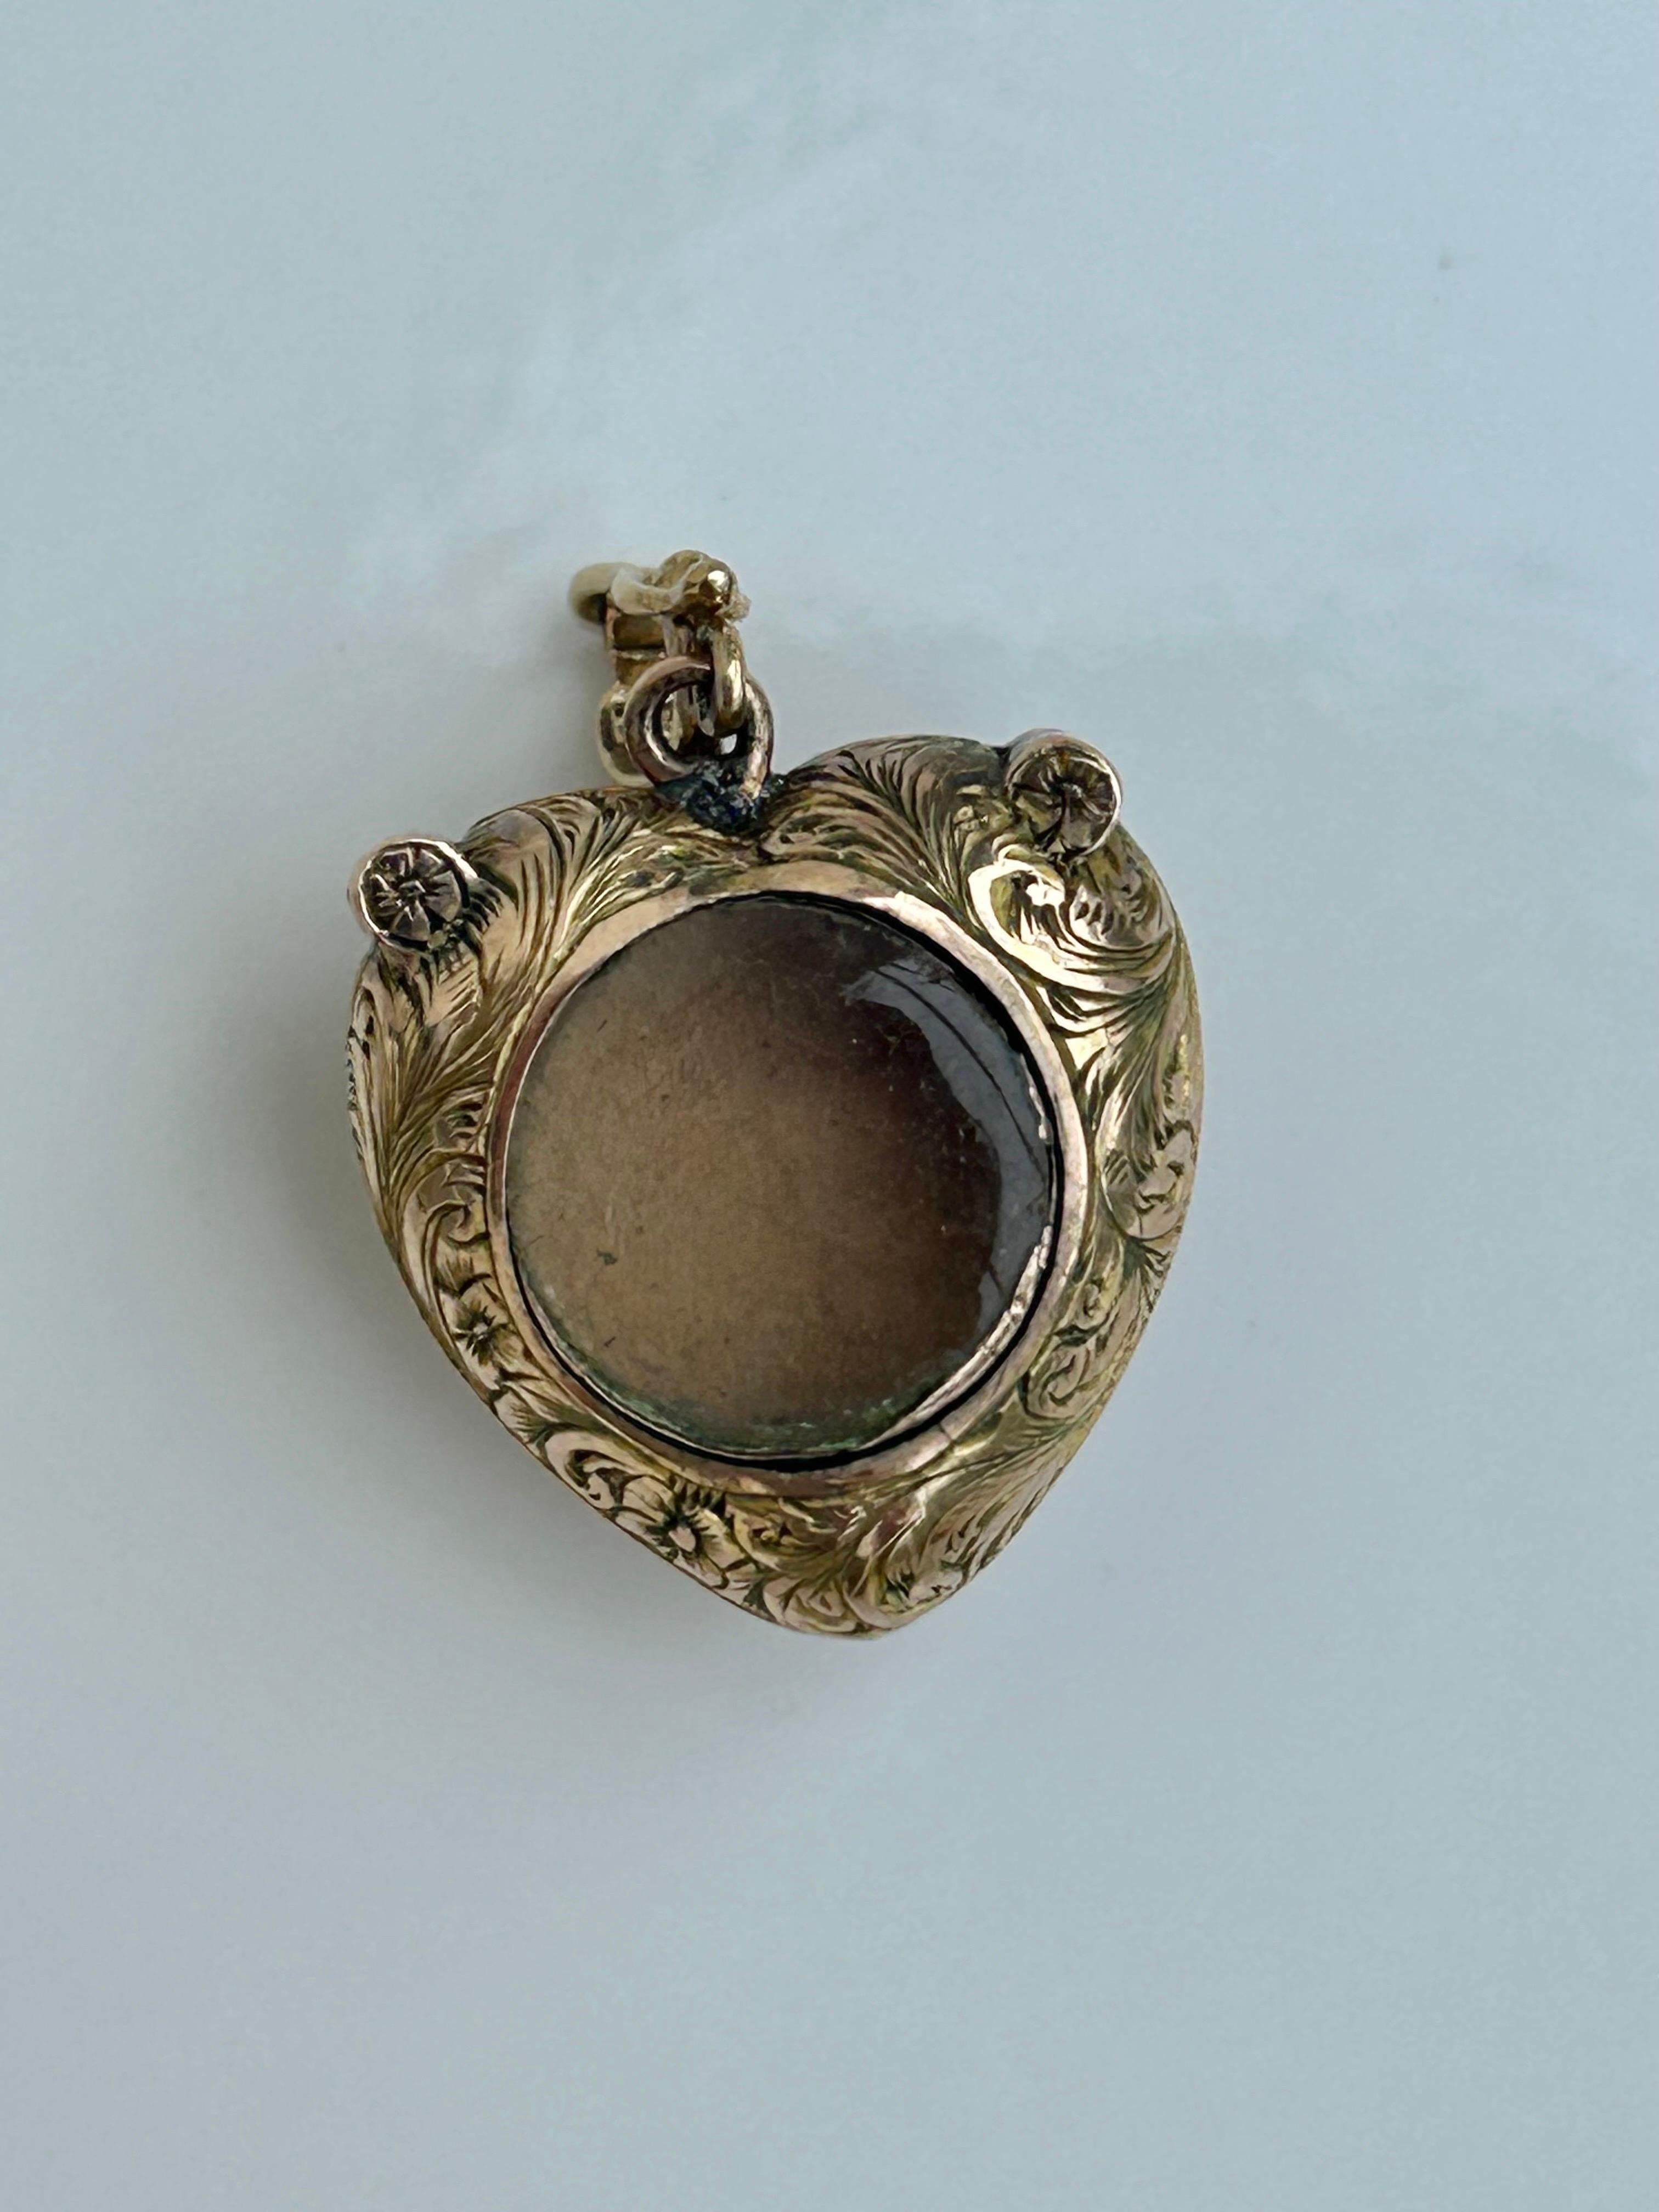 Victorian Garnet and Pearl Padlock / Locket Back Heart Pendant 

gorgeous engraved pendant which was originally a padlock

The item comes without the box in the photos but will be presented in an Howard’s Antique gift box

Measurements: weight